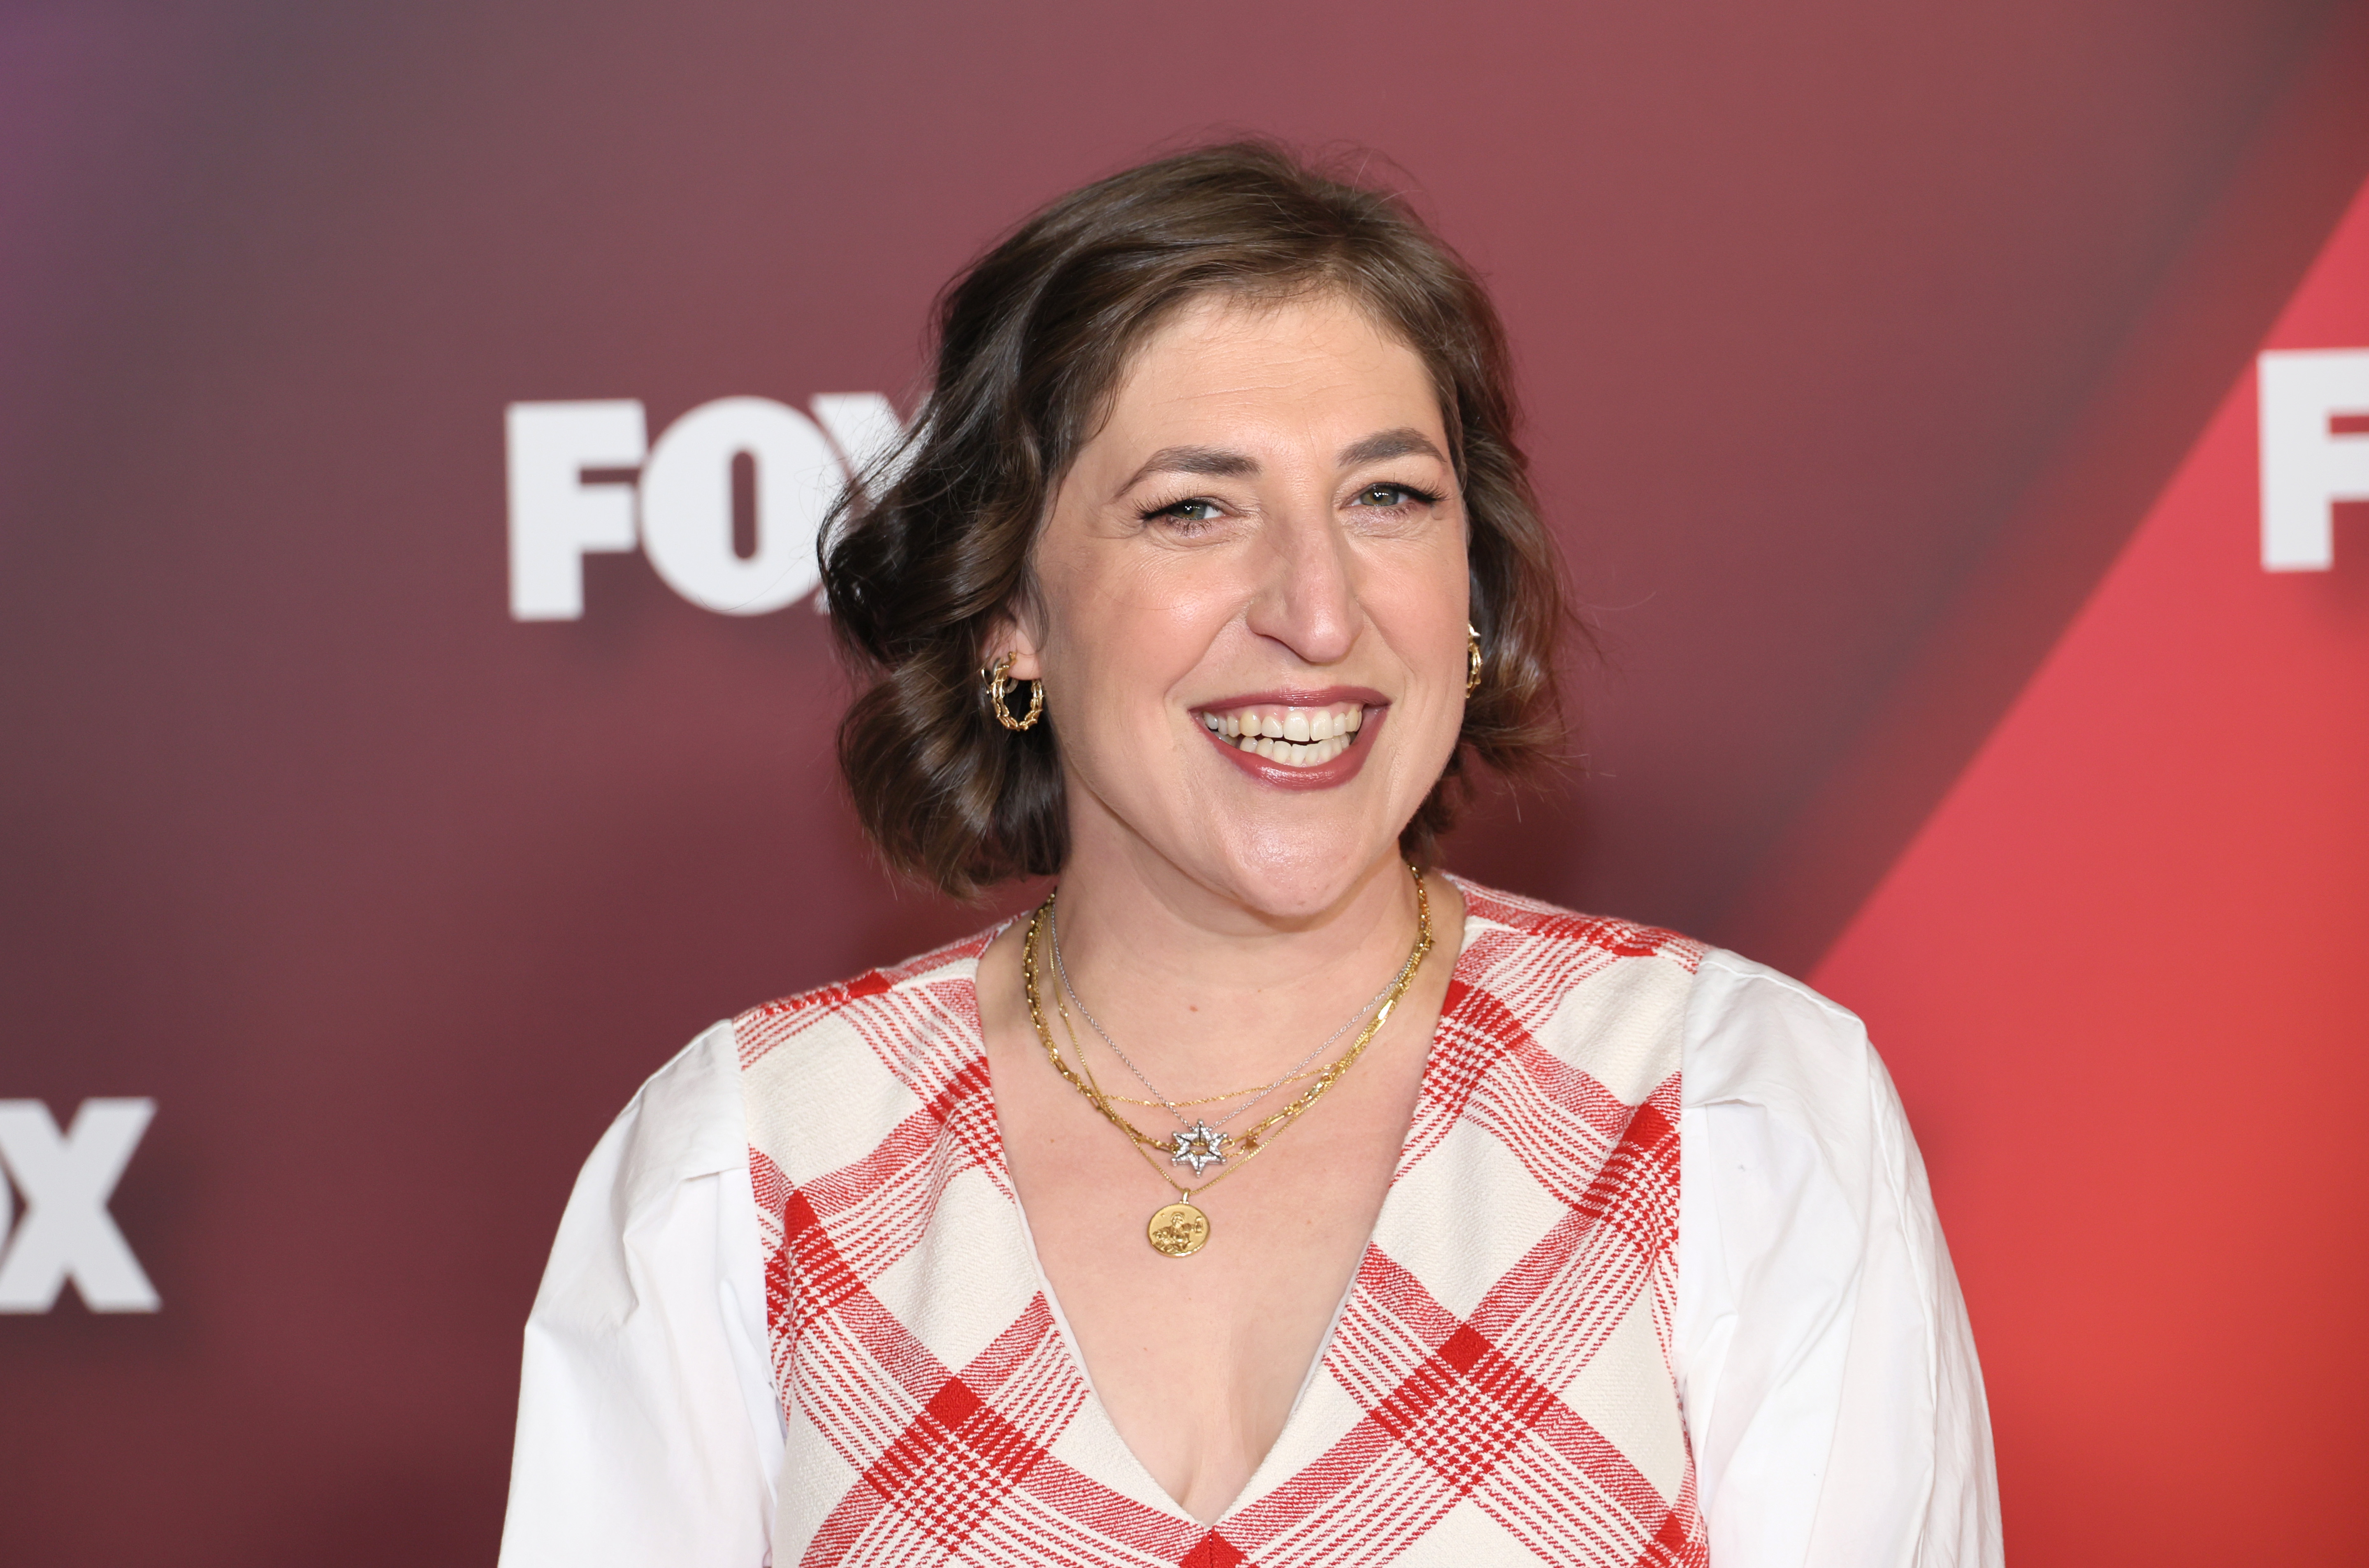 Mayim Bialik at the 2022 Fox Upfront on May 16, 2022, in New York City. | Source: Getty Images